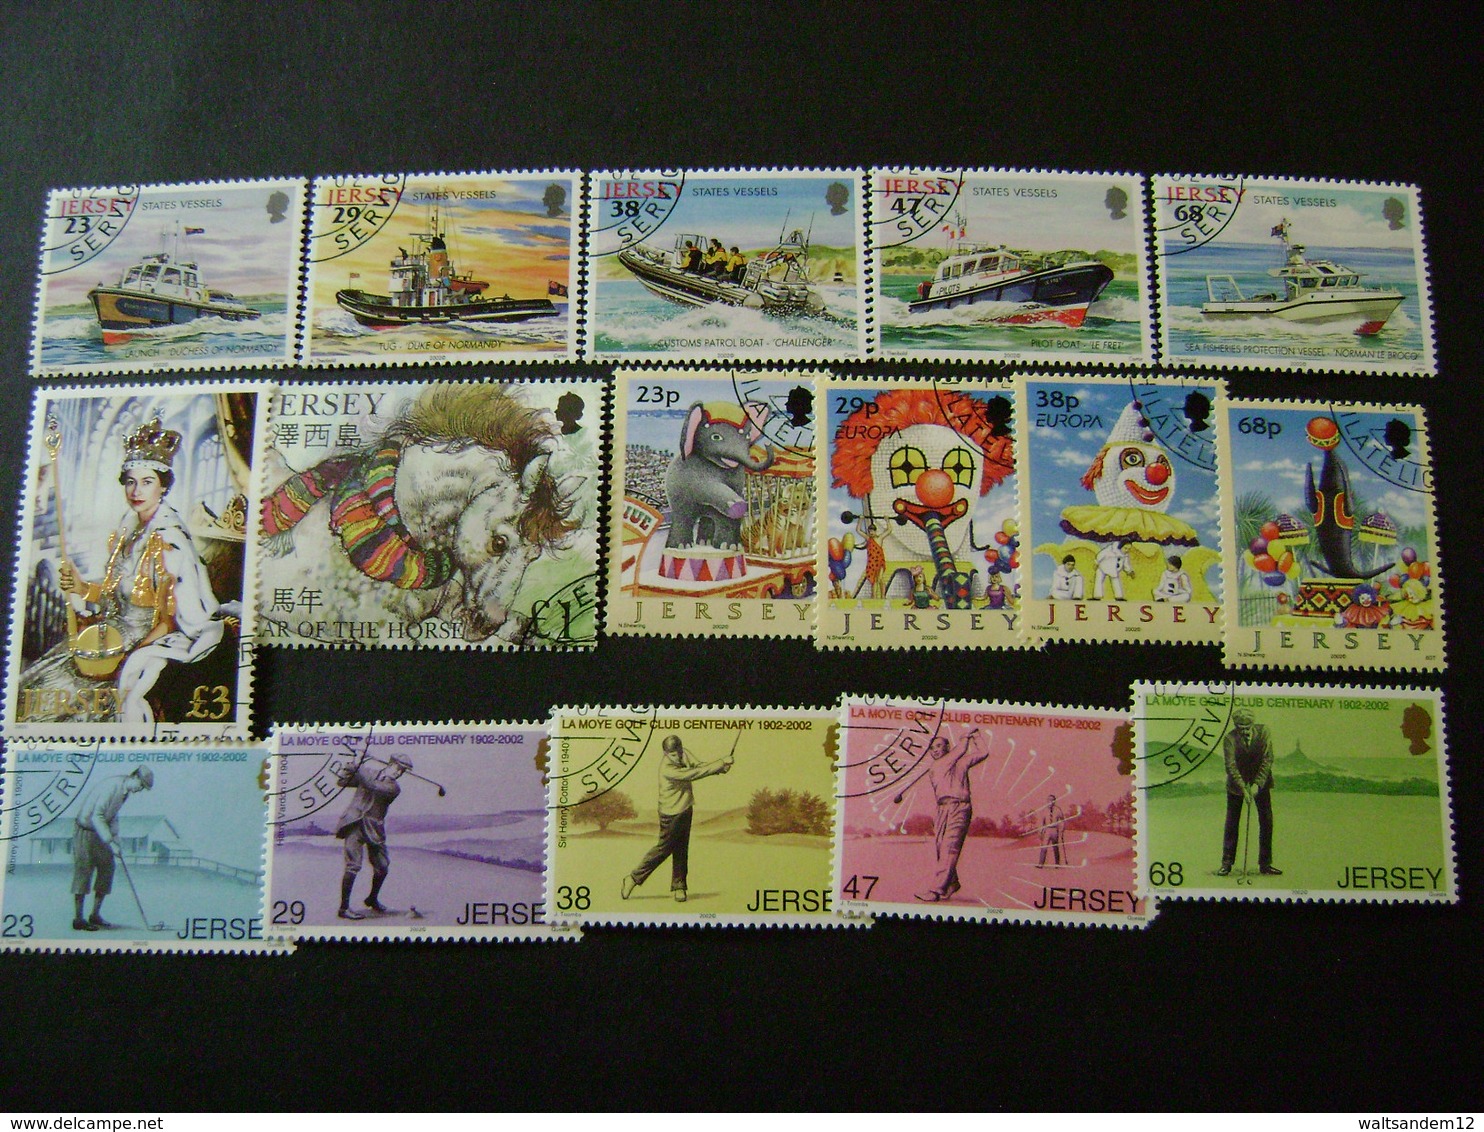 Jersey 2002 Commemorative/special Issues (SG 1024-1073) 3 Images - Used [Sale Price] - Jersey